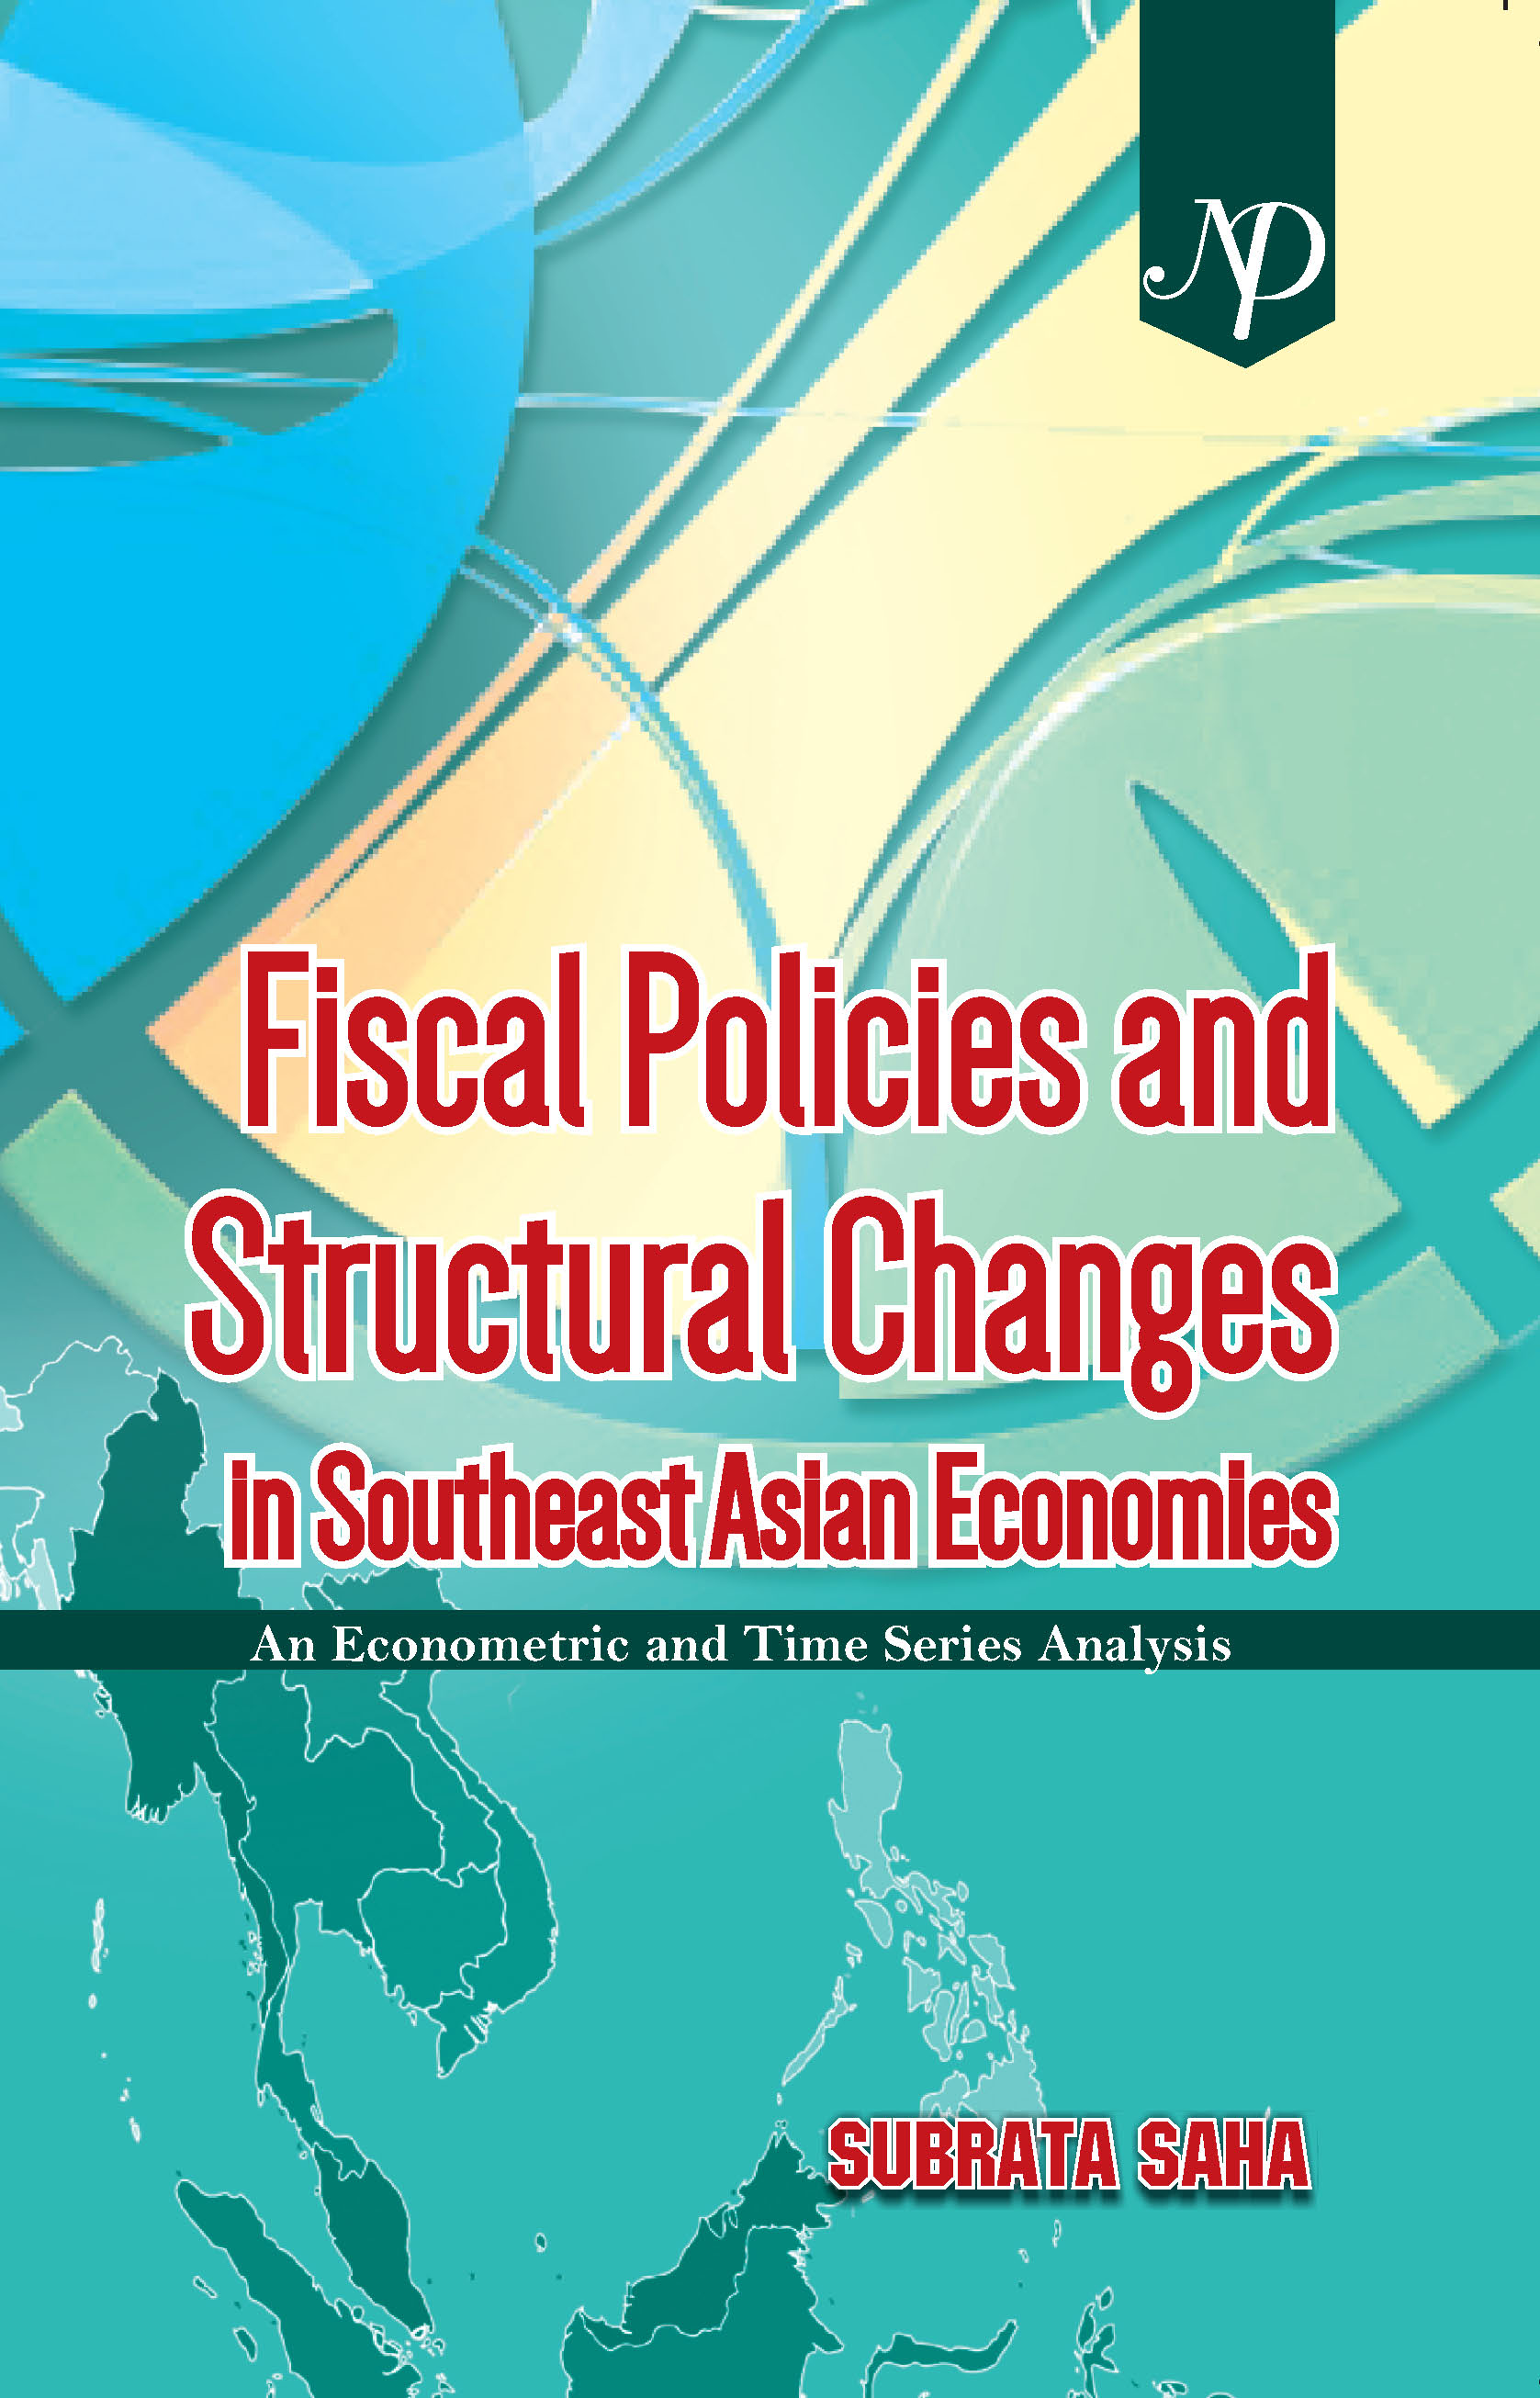 Fiscal Policies and Stucture Change in Southeast Asian Cover New.jpg